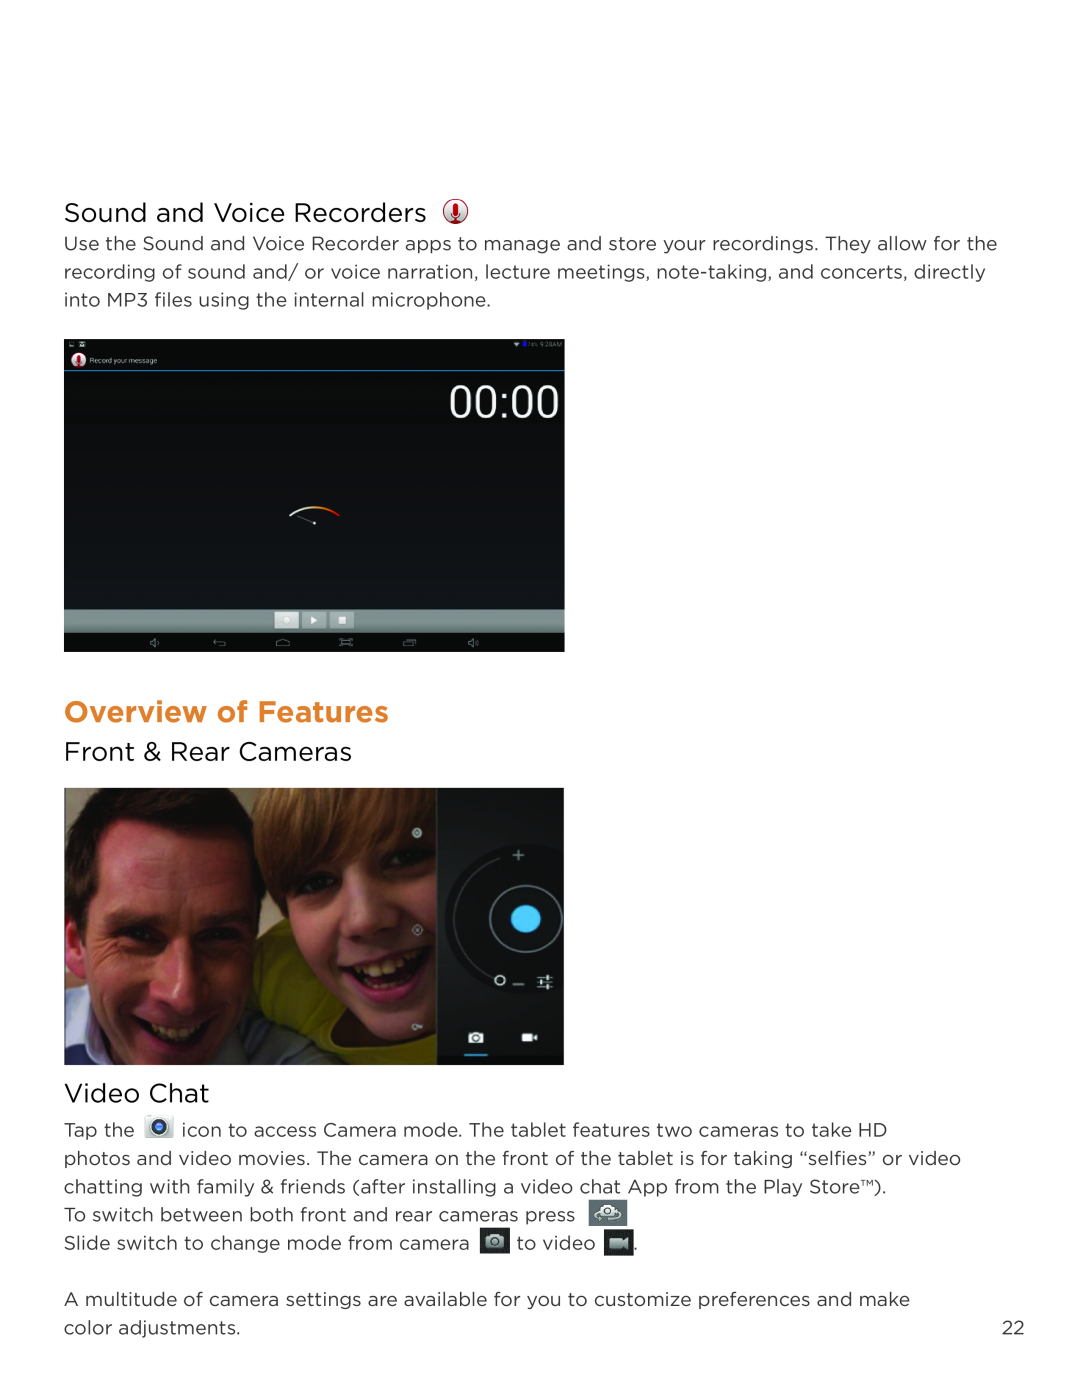 NuVision TM1218 user manual Overview of Features, Sound and Voice Recorders, Front & Rear Cameras Video Chat 